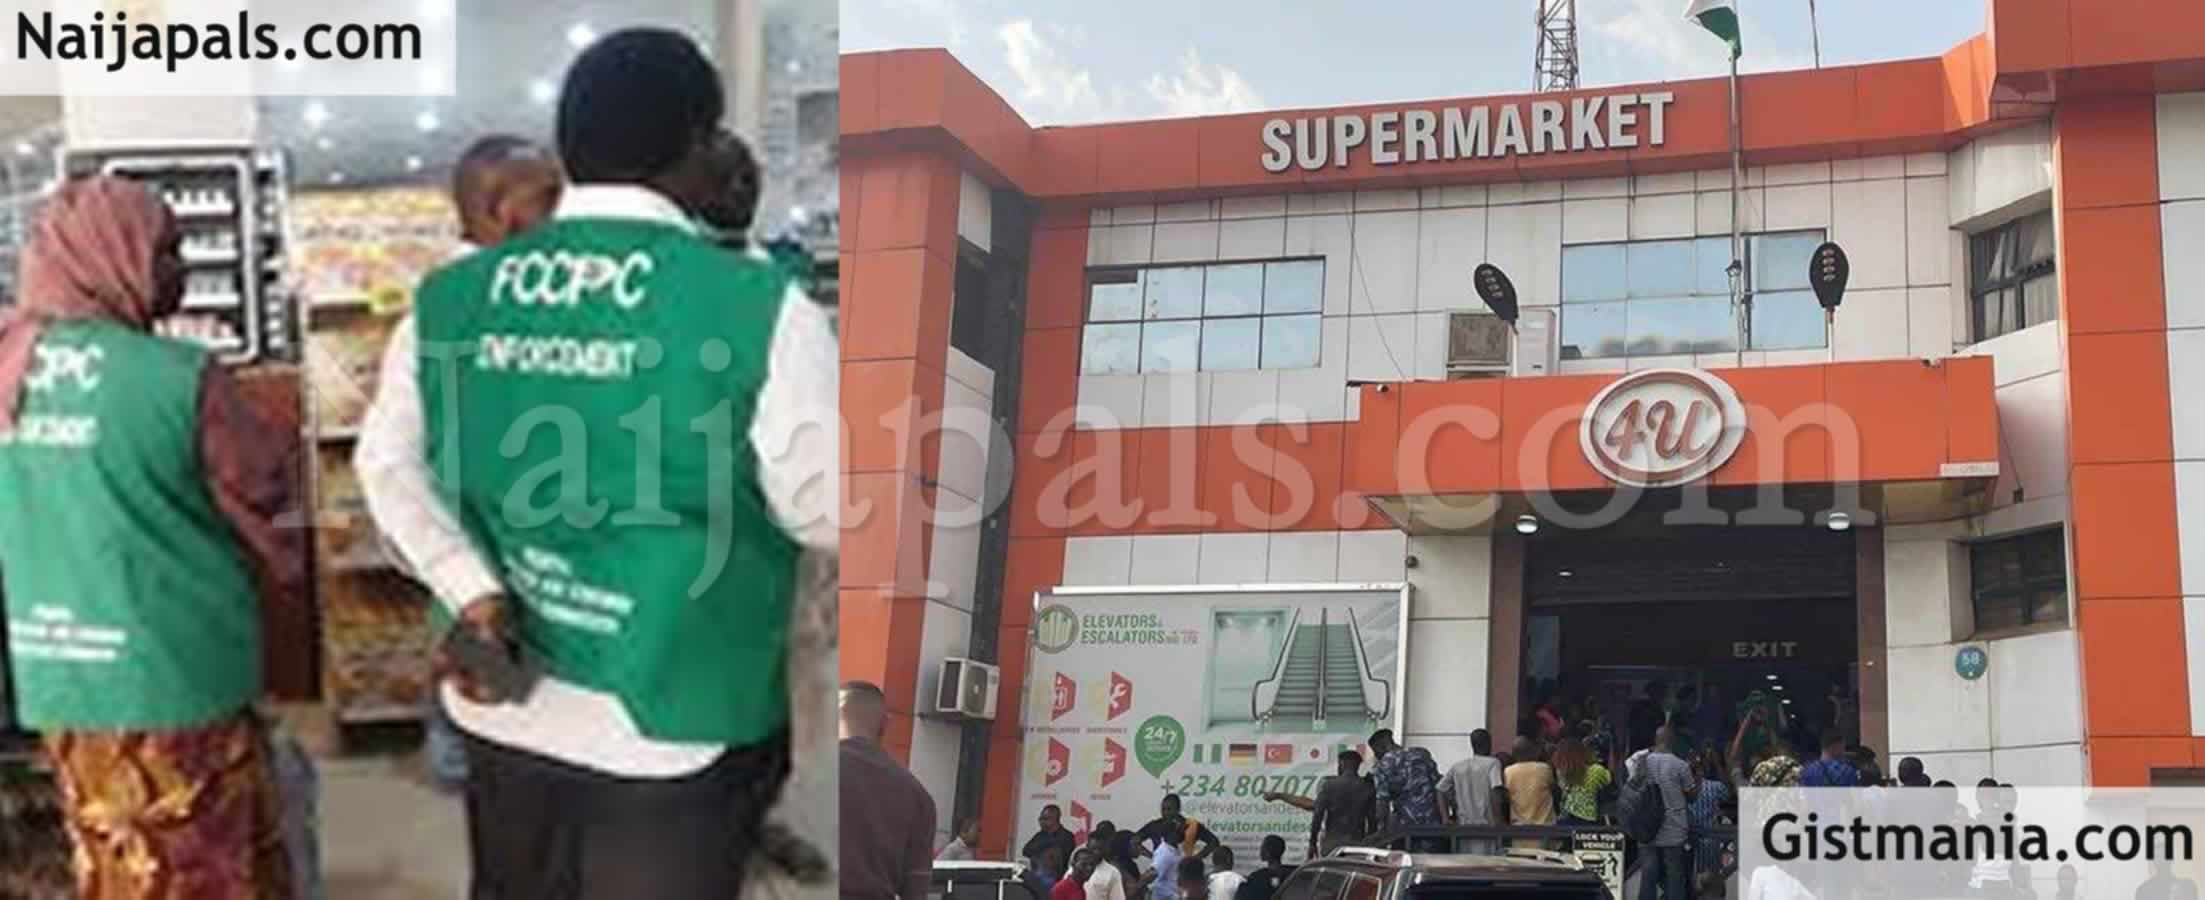 JUST IN: FCCPC Shuts Down Popular 4U Supermarket in Abuja Over ‘Unfair Pricing’